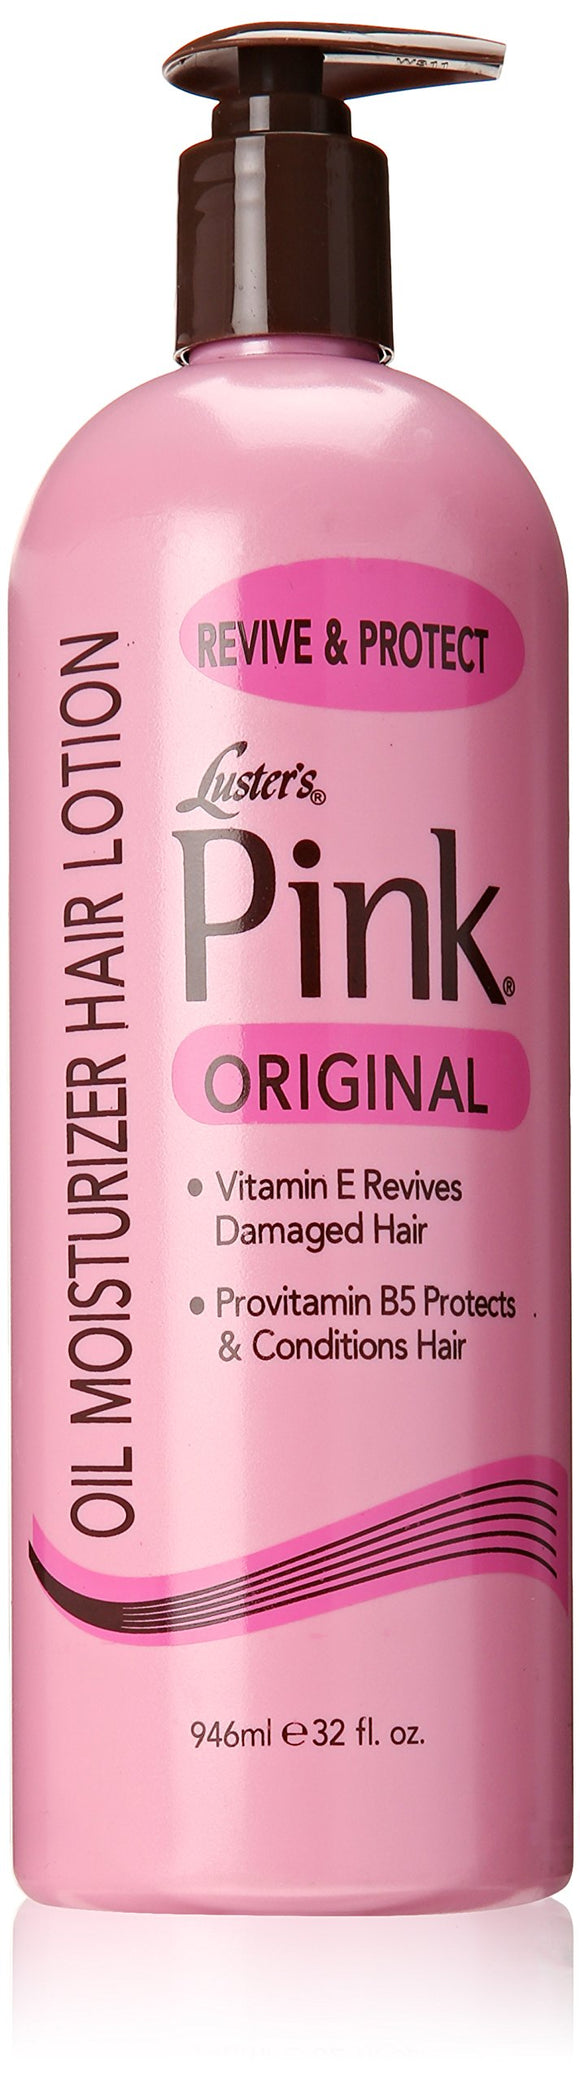 Luster's Pink Oil Moisturizer Hair Lotion, 32 Ounce (Packaging may vary) - Beauty Fleet